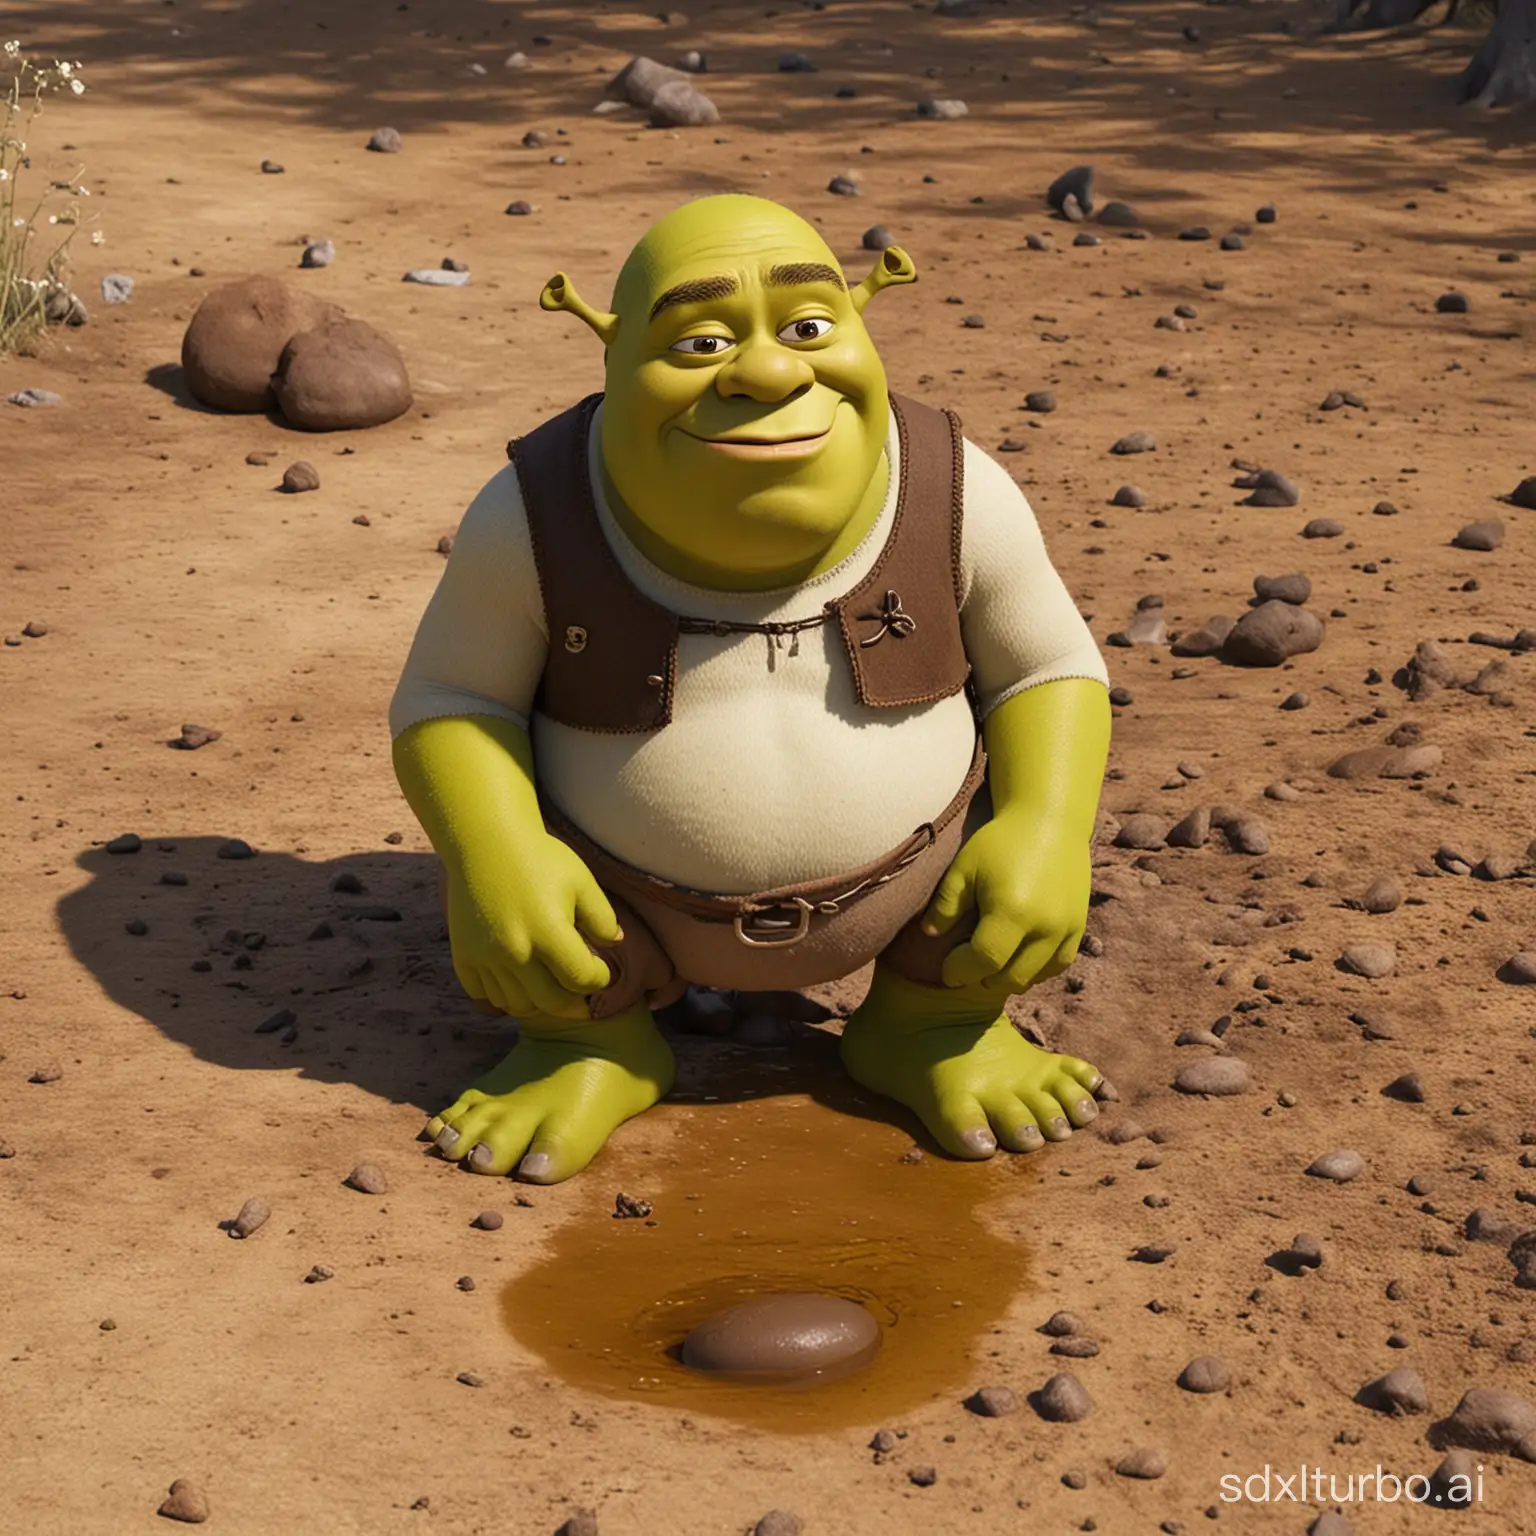 Shrek poops diarrhea on the ground. A brown stream pours from his buttocks